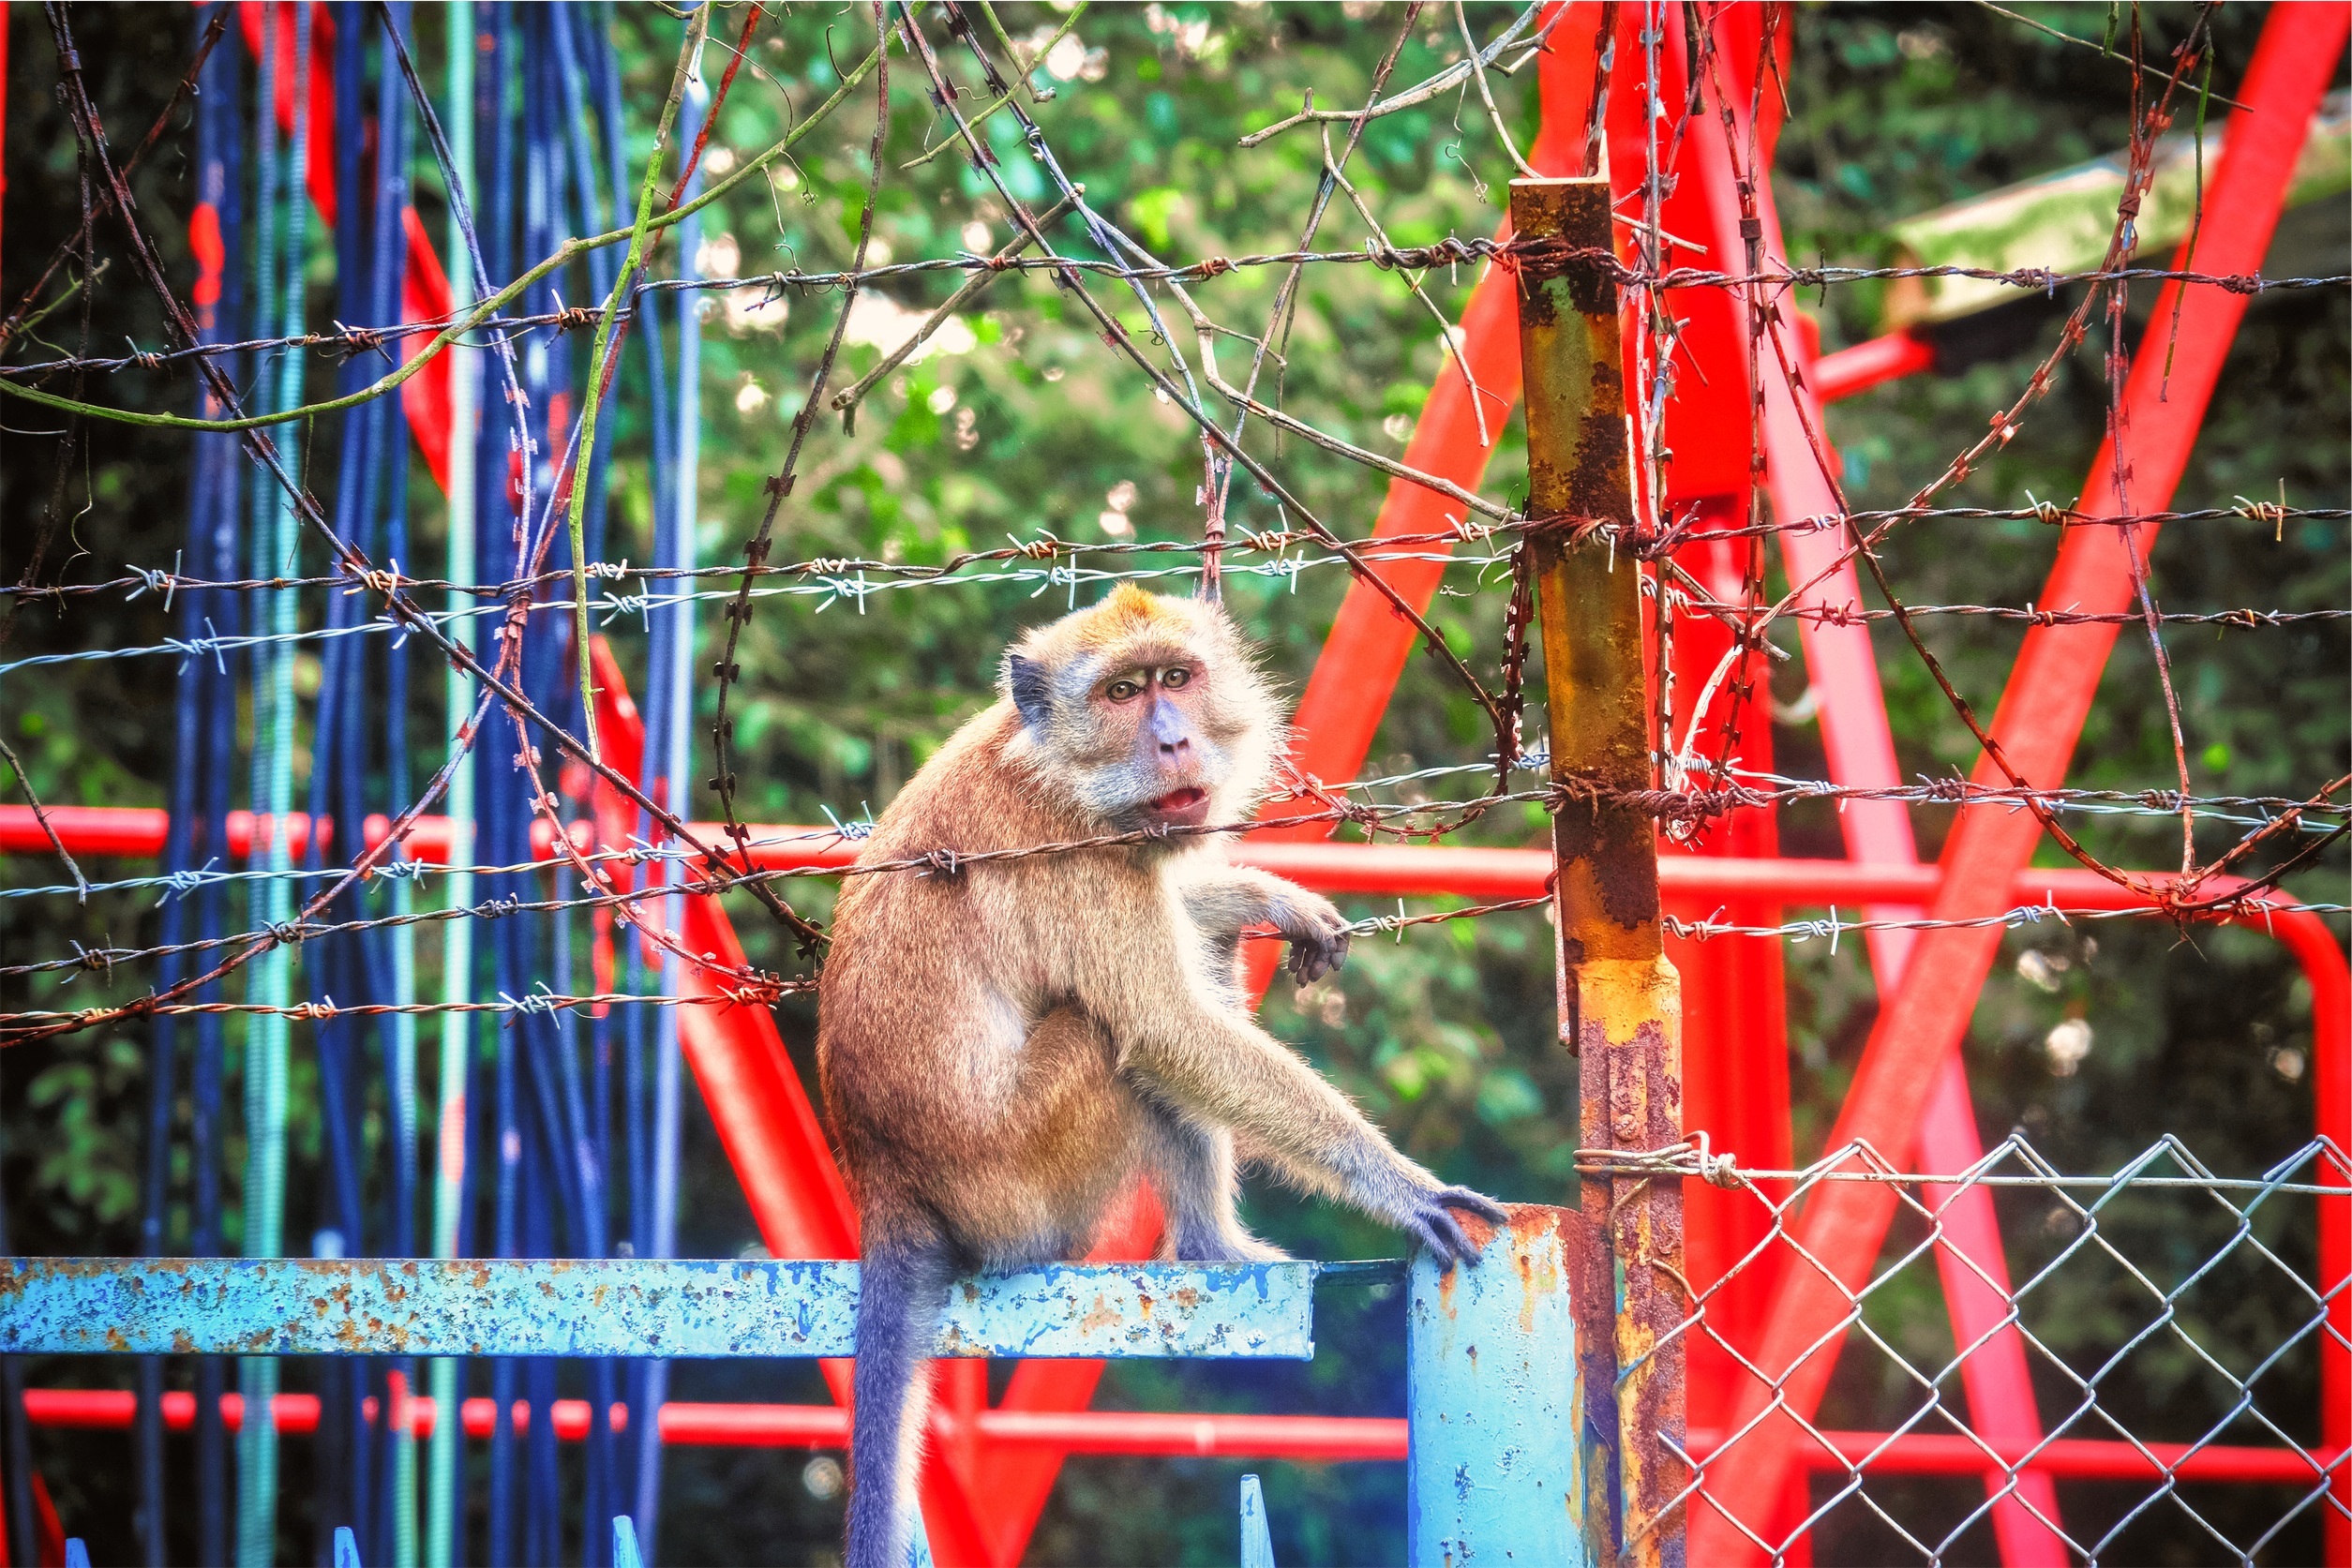 monkey, animals, zoo, barbed wire cellphone